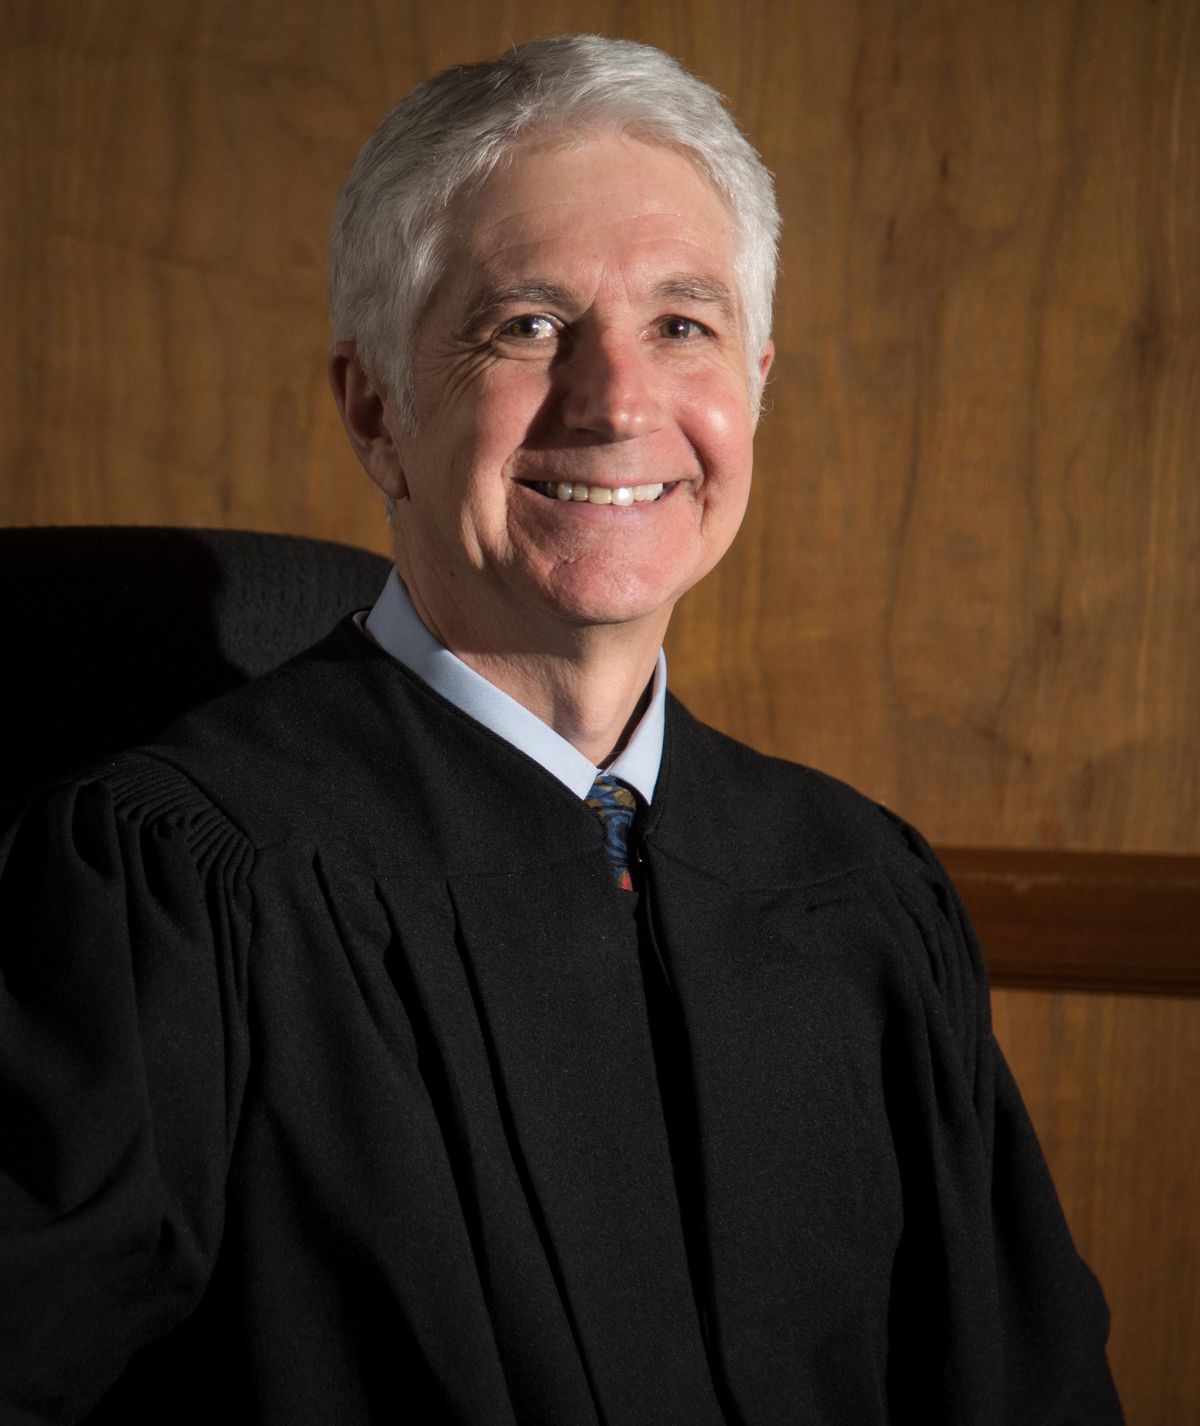 Spokane County Superior Court Judge Timothy Fennessy recently his four-year term as a judge after beating sitting Judge Greg Sypolt in the November election. (Colin Mulvany / The Spokesman-Review)